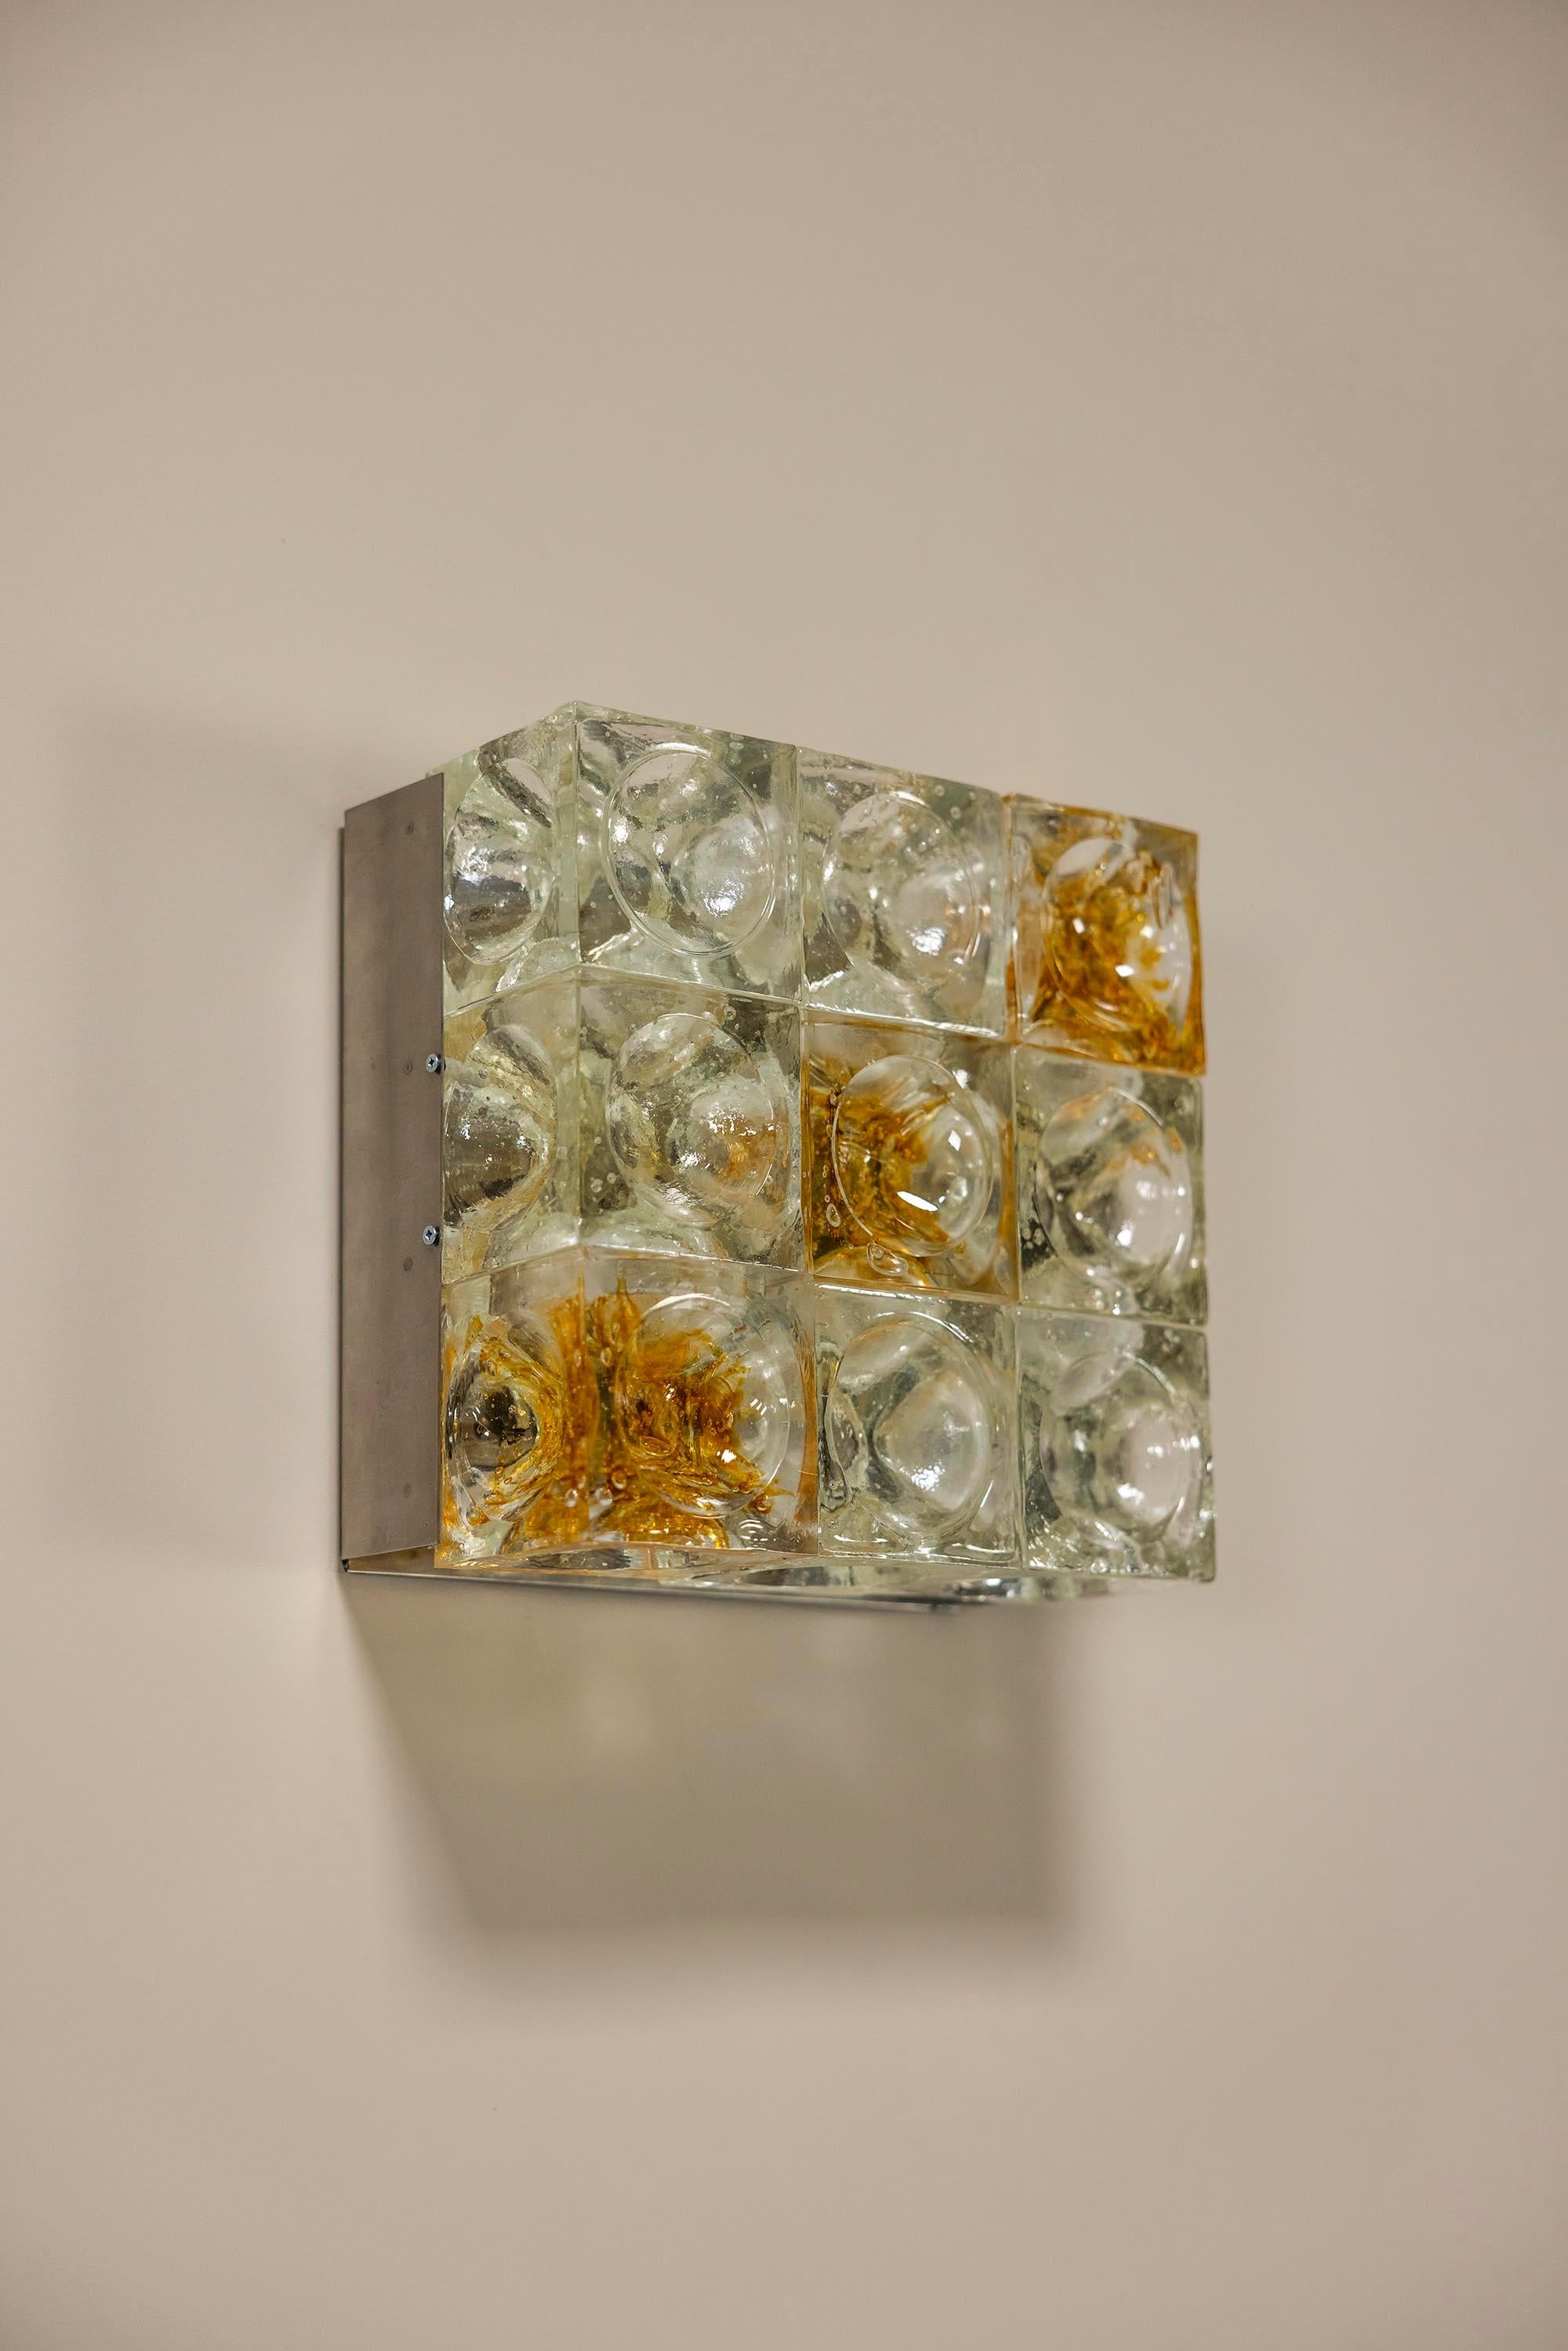 Mid-Century Modern PoliArte Square Wall Sconce In Murano By Albano Poli, Italy 1970's